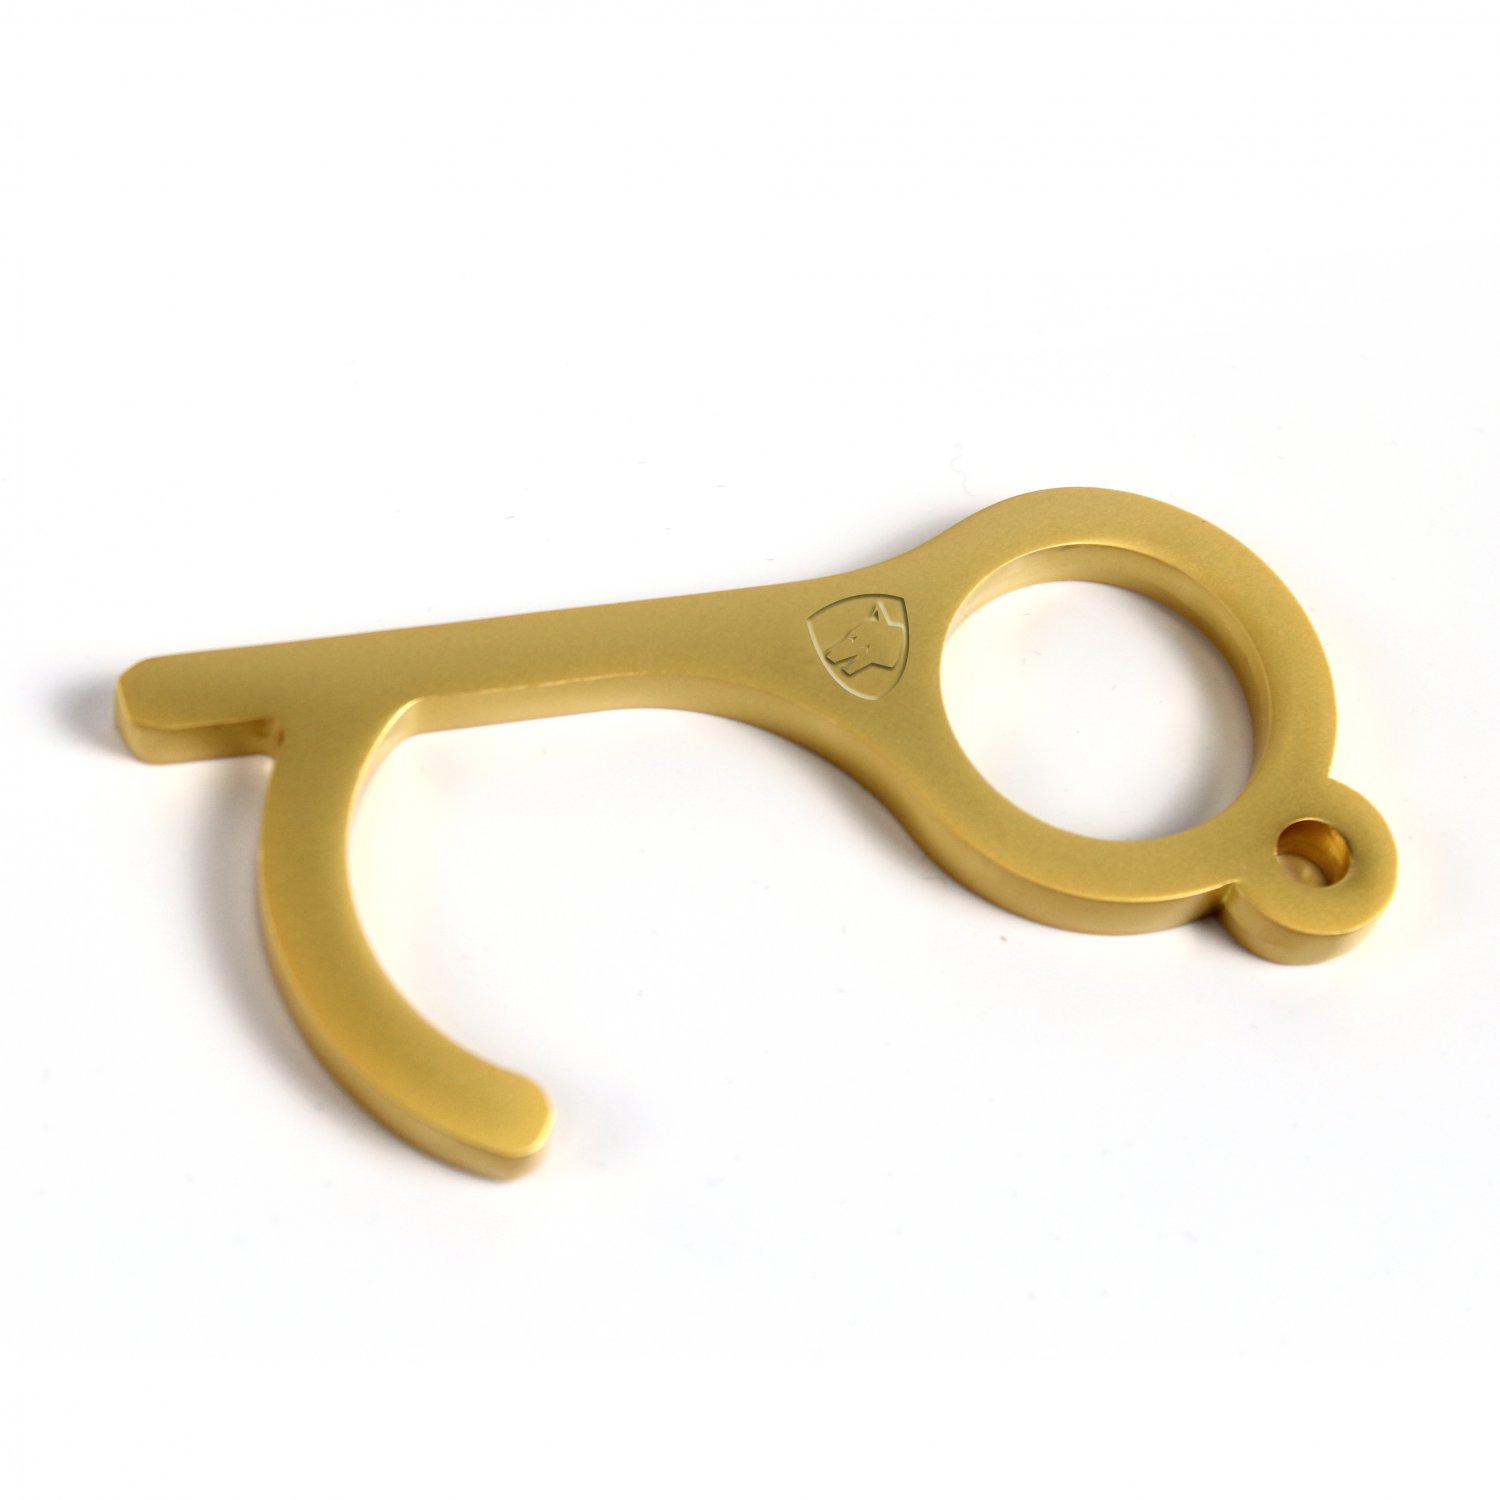 No Touch Keychain Gold Hand tool for Touchless Opening Doors and